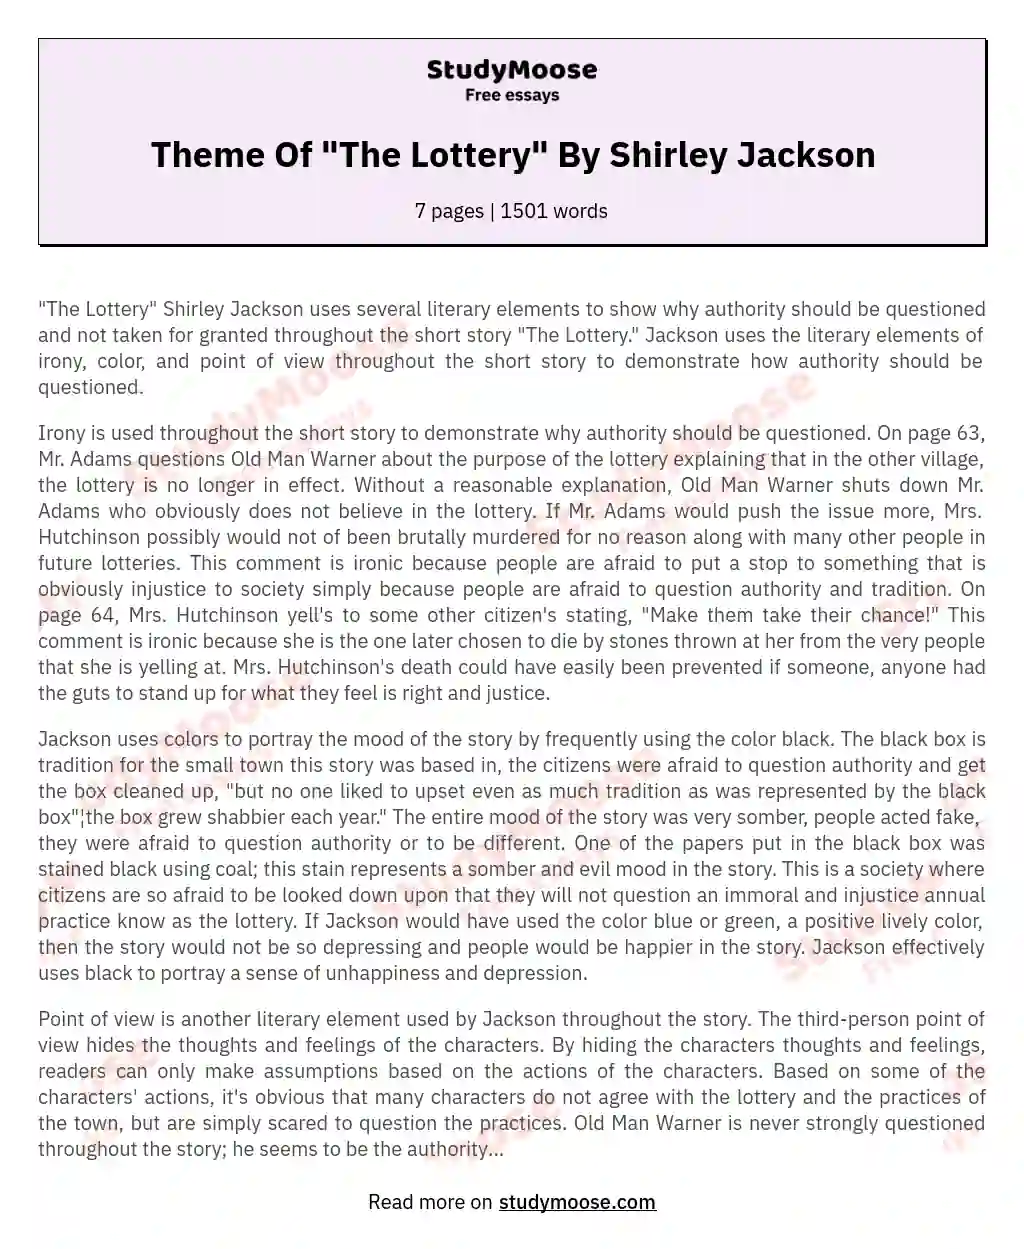 Theme Of "The Lottery" By Shirley Jackson essay